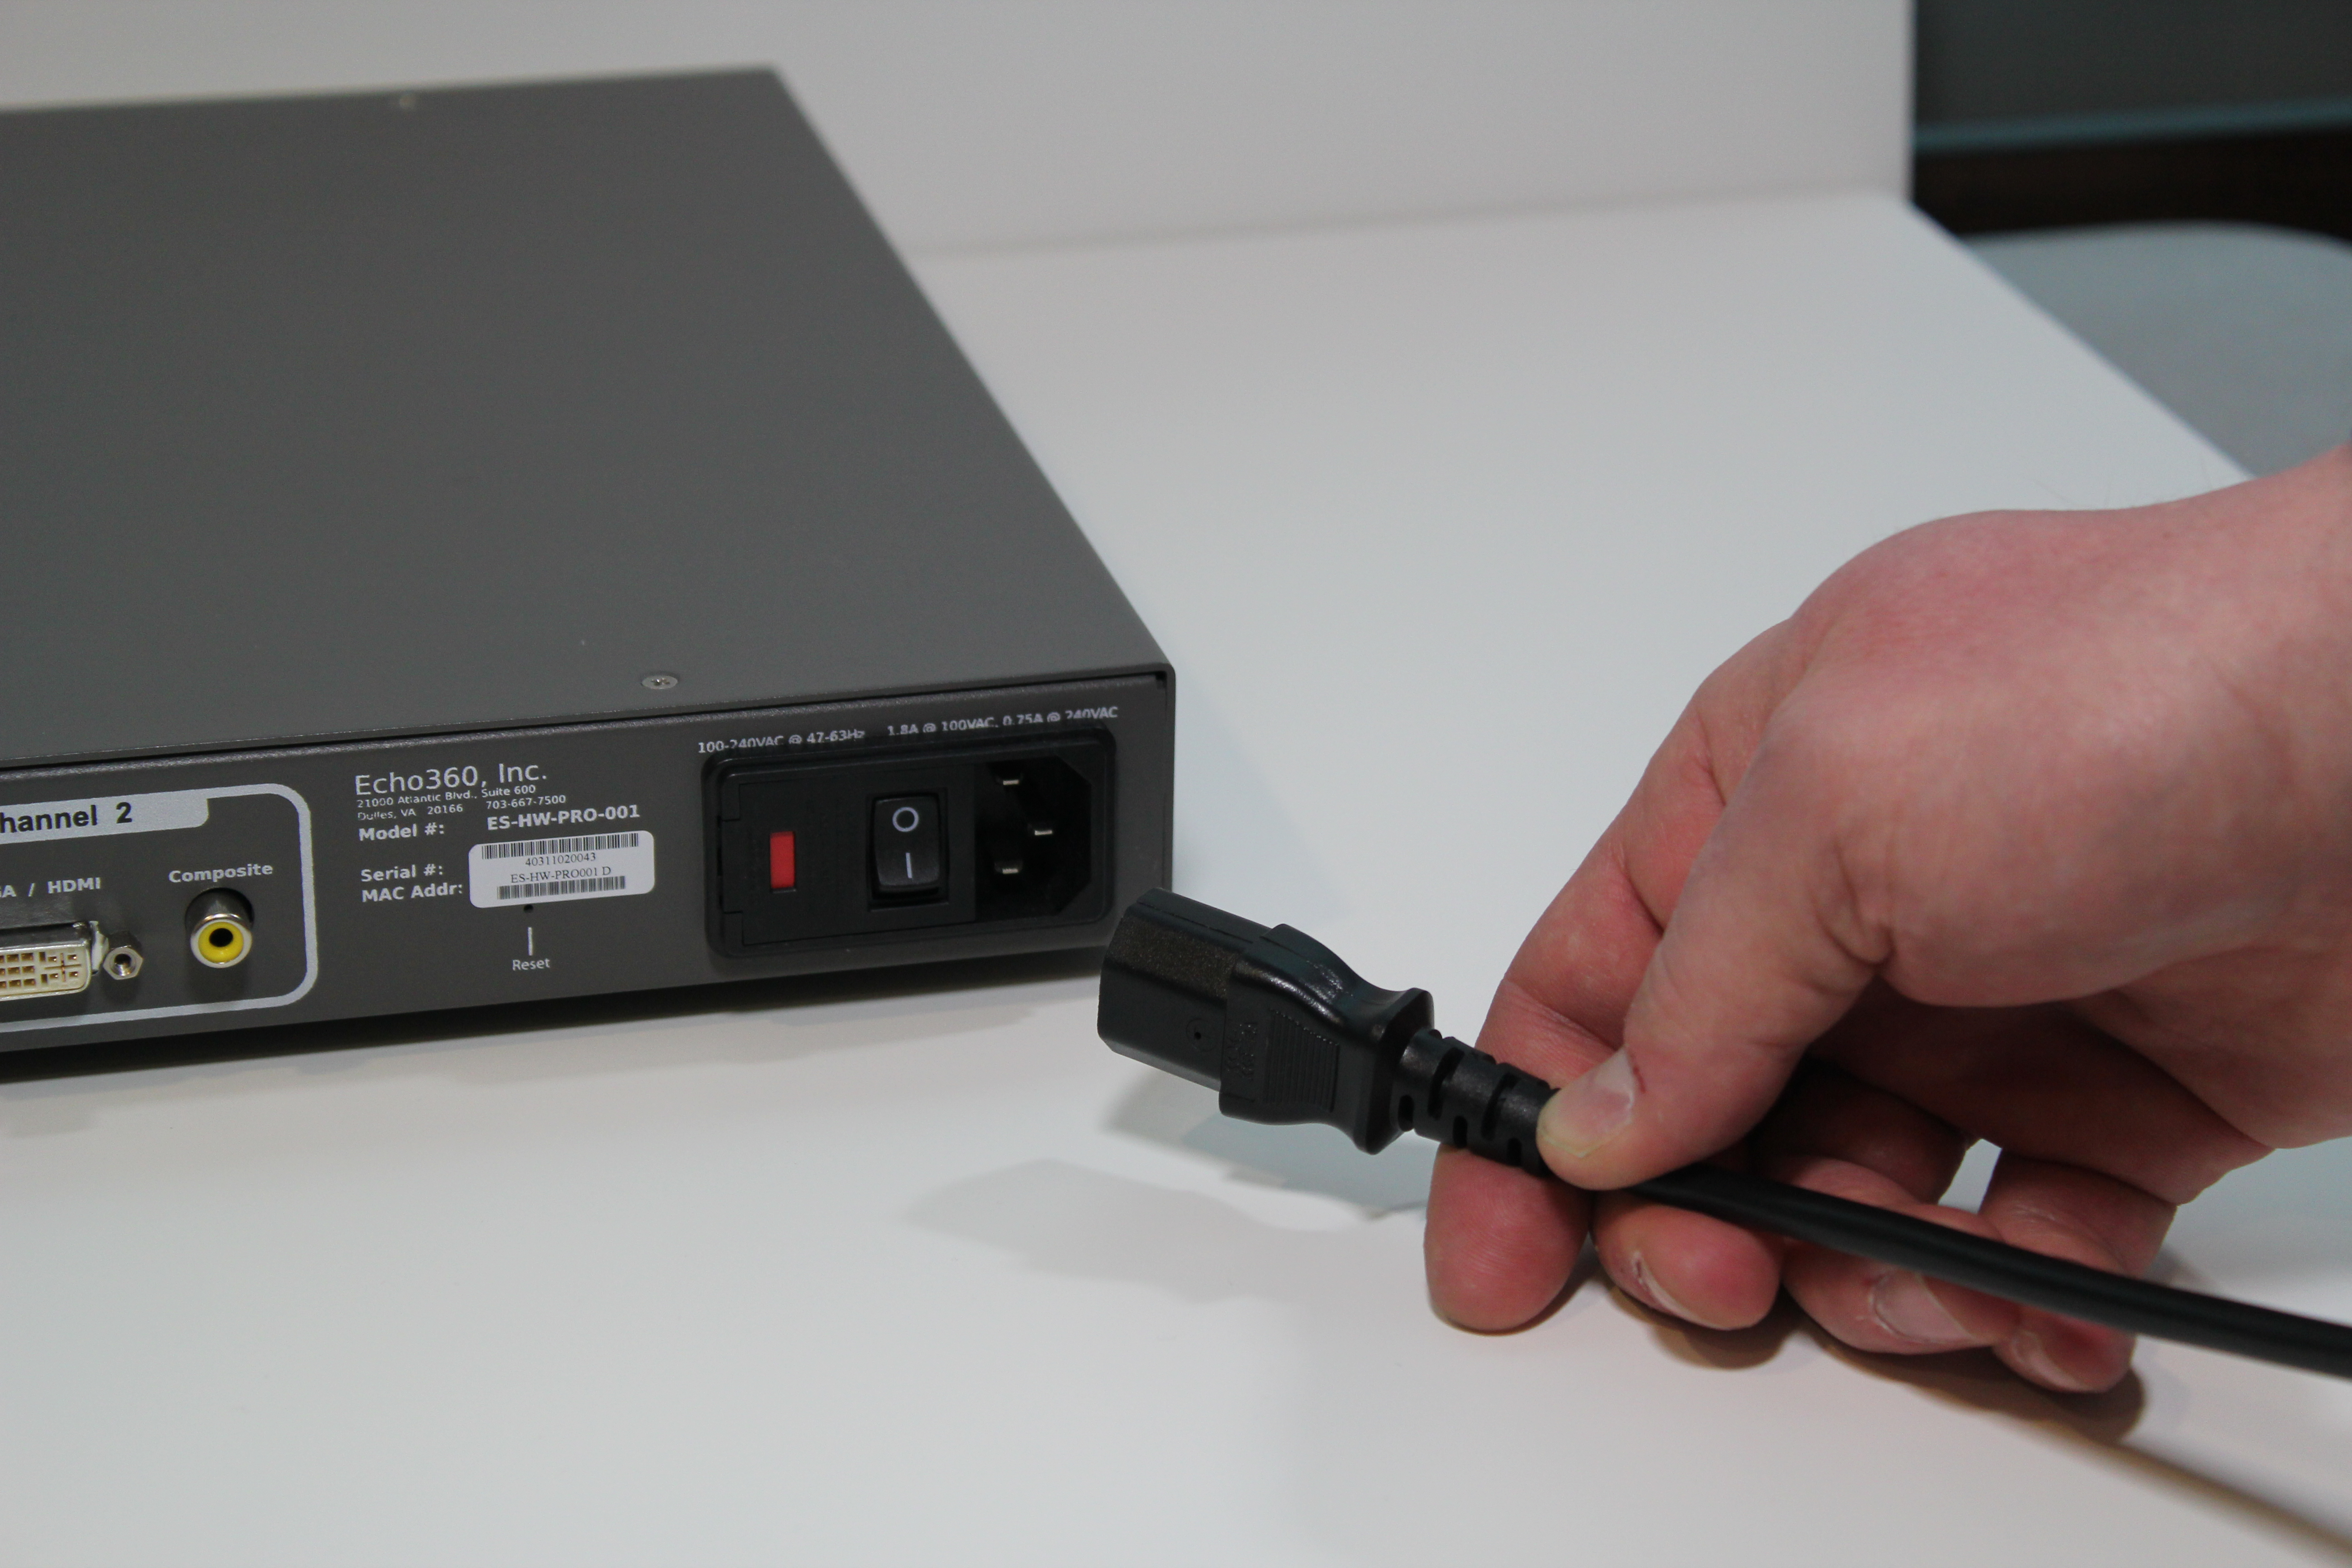 Picture of power cord being plugged into SafeCapture HD device.